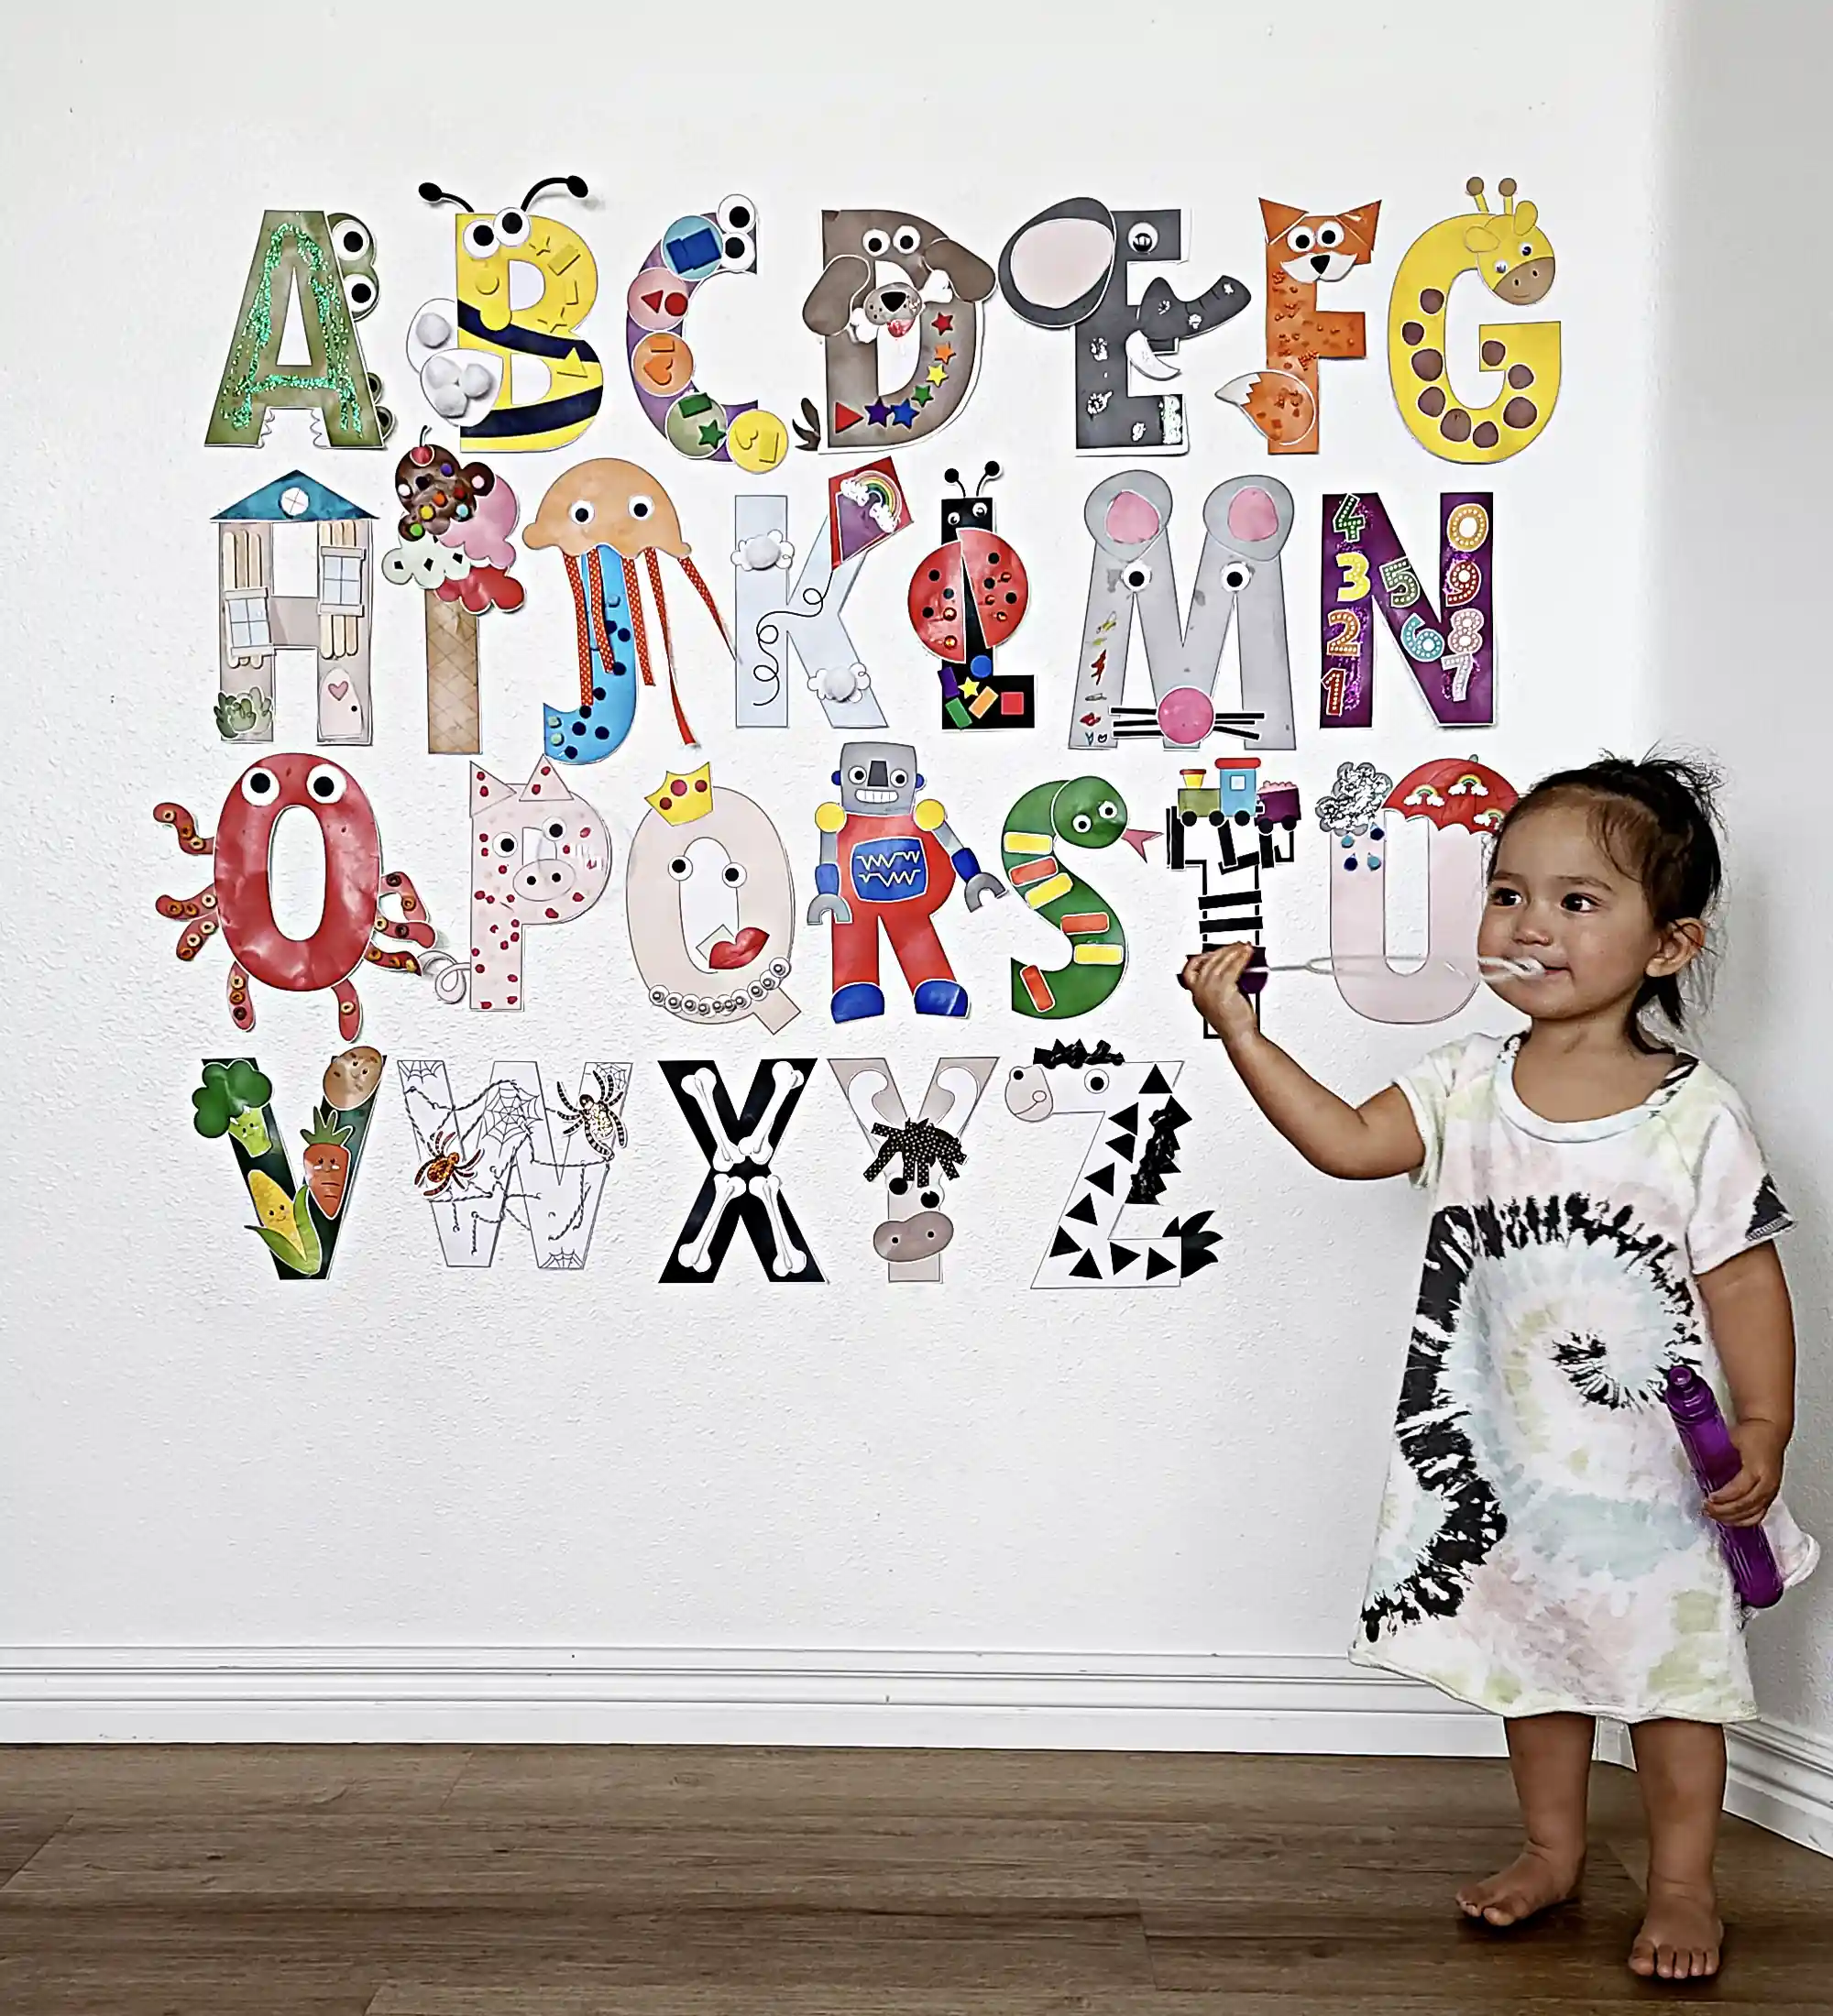 Alphabet letter crafts for kids. Download the printable alphabet letter craft pages to teach kids their ABCs and for a hands-on fun art project. These alphabet letter crafts make the most fun letter wall and help your children recite theirs alphabet while they point to their own DIY letters they colored and decorated!